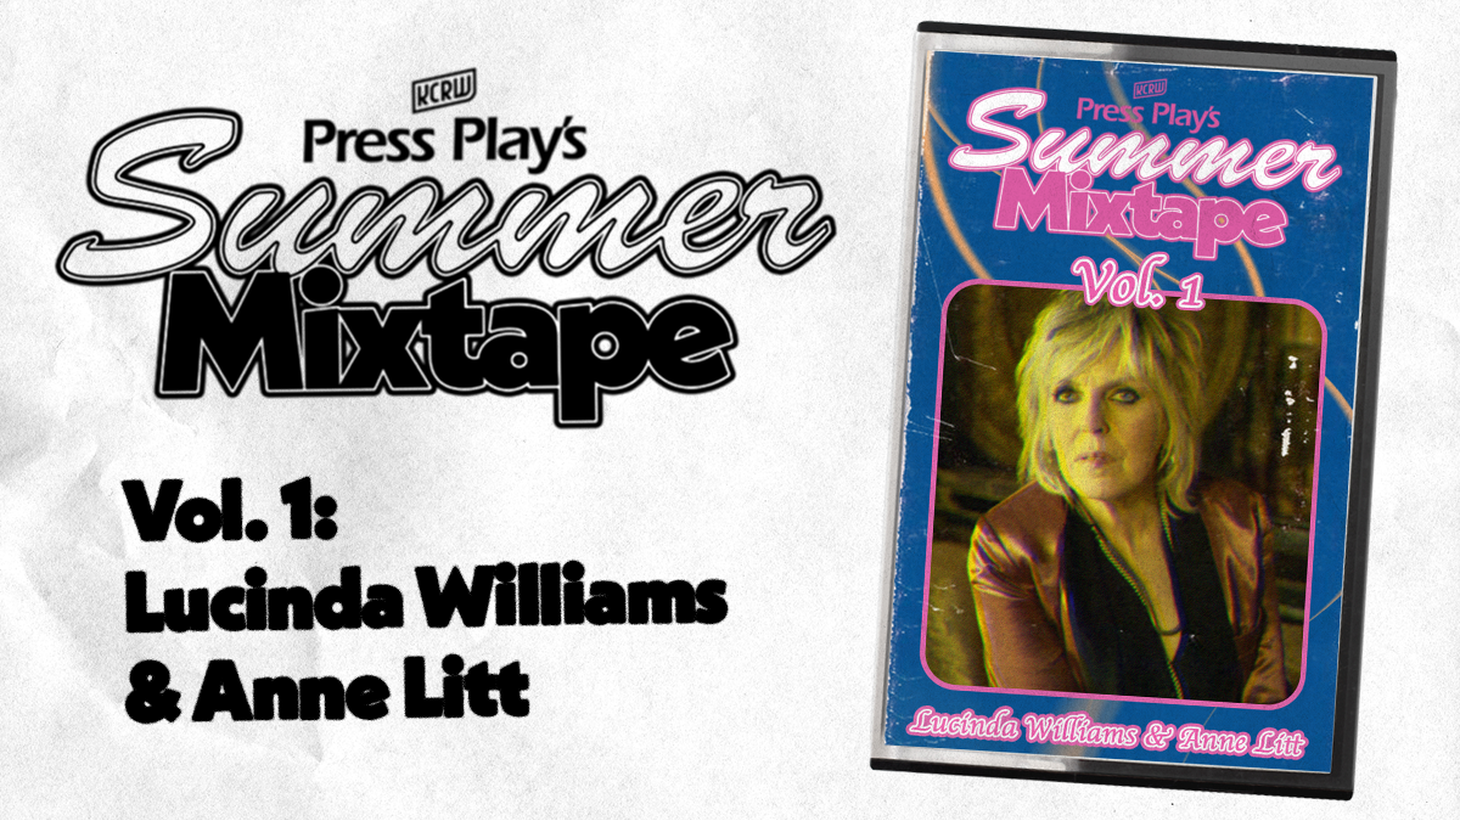 The first episode of this year’s Summer Mixtape features Lucinda Williams and Anne Litt.